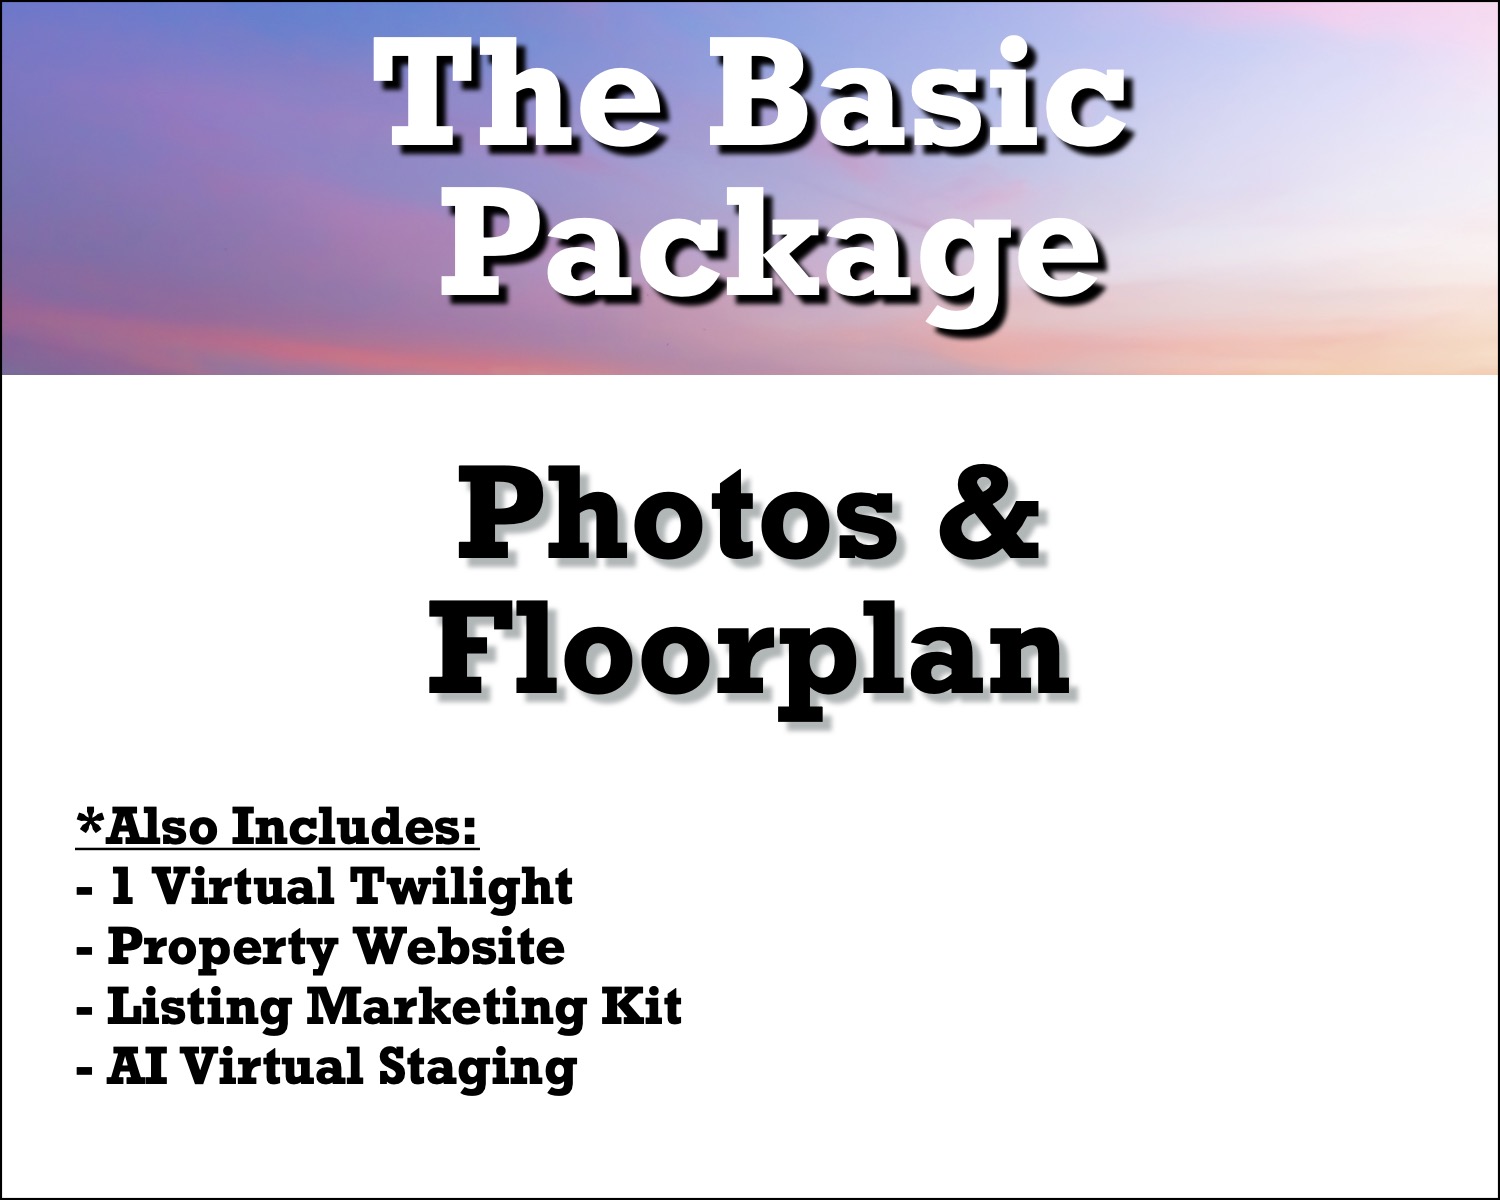 The Rockstar Photography Package